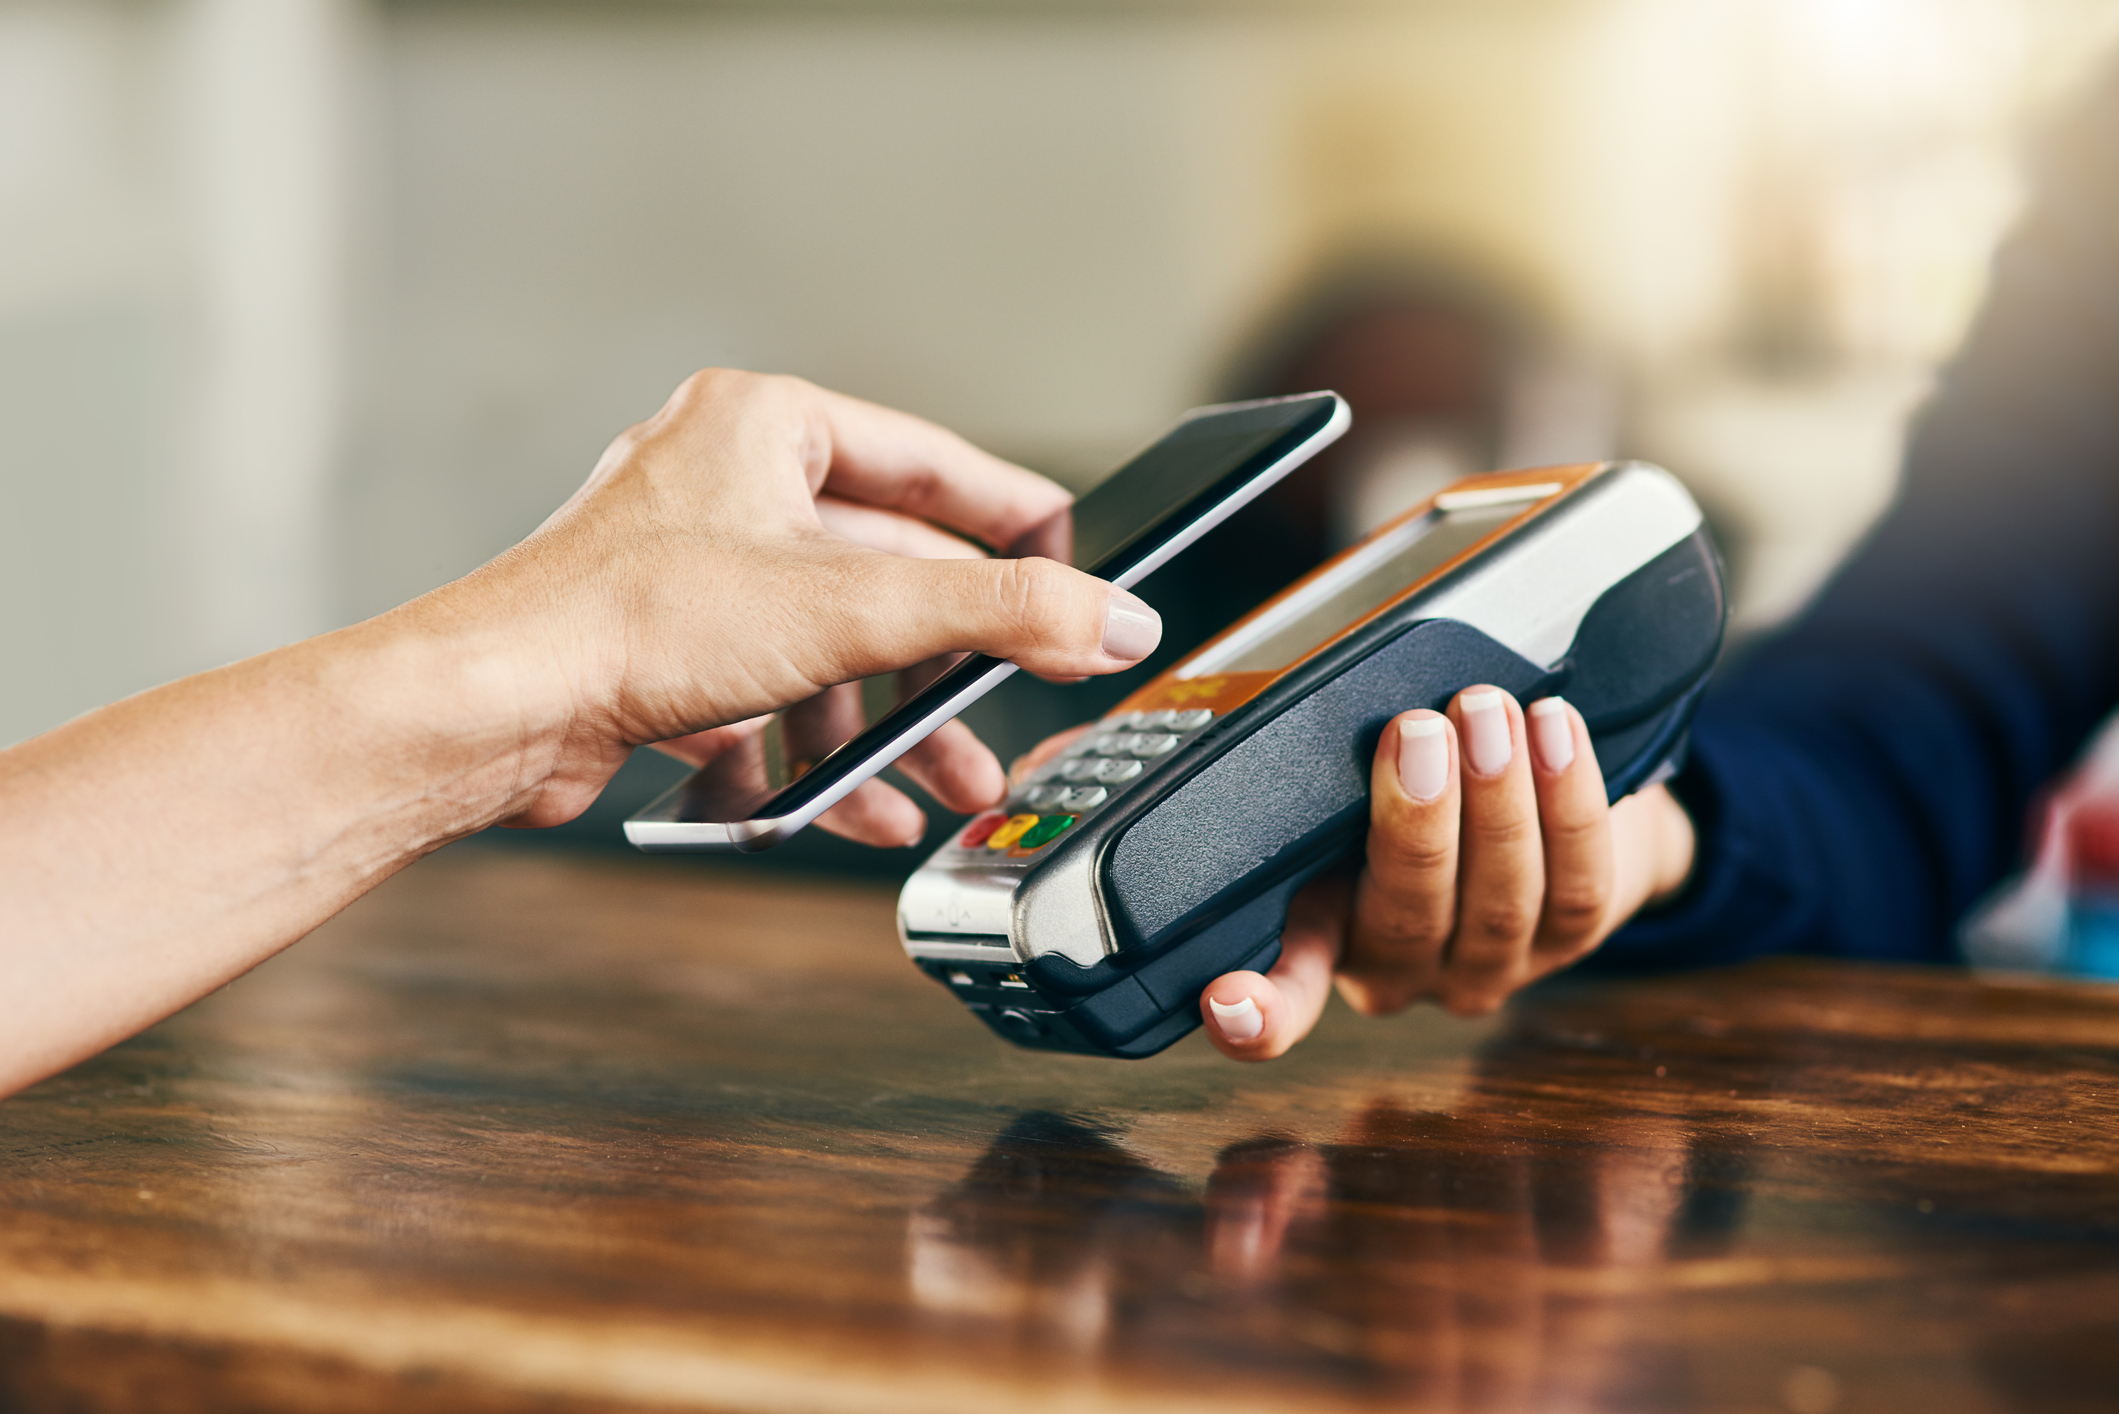 A student uses Mobile Pay on a smartphone to pay at a store with contactless credit payments.